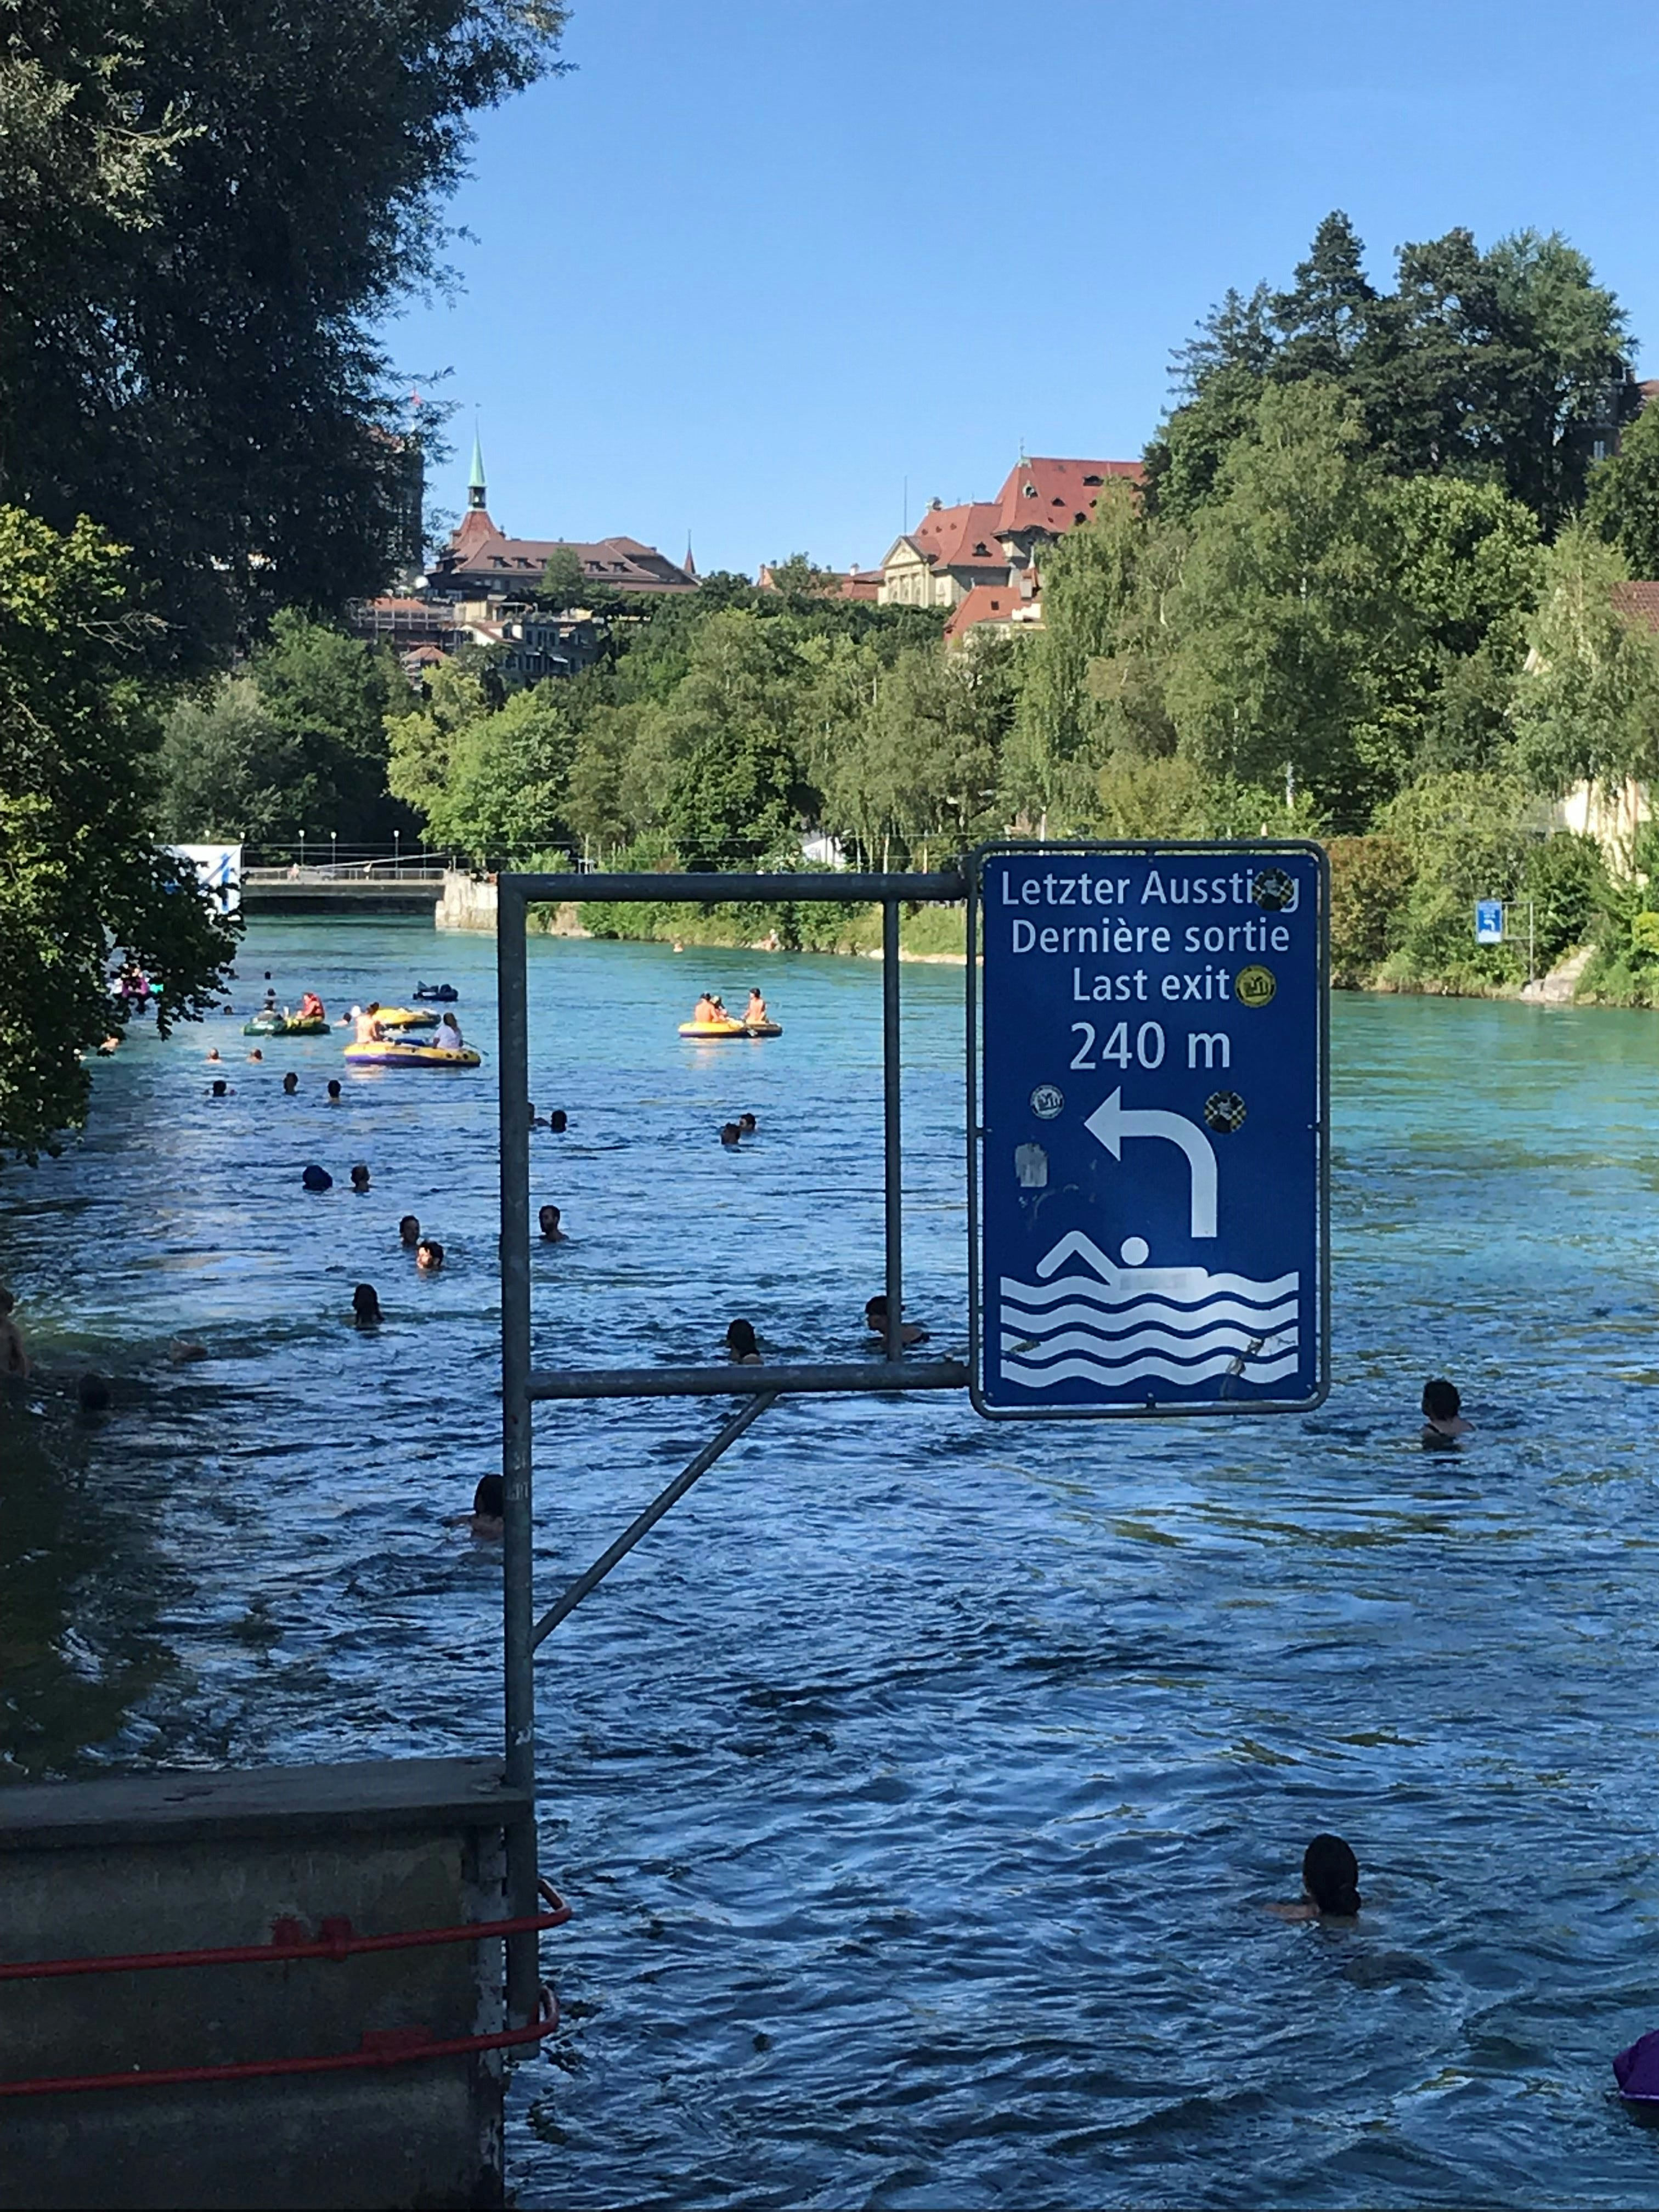 Many people are swimming down a river. Some groups are in yellow inflatable rafts. In the foreground is a large blue sign indicating the last exit for swimmers to leave the river.